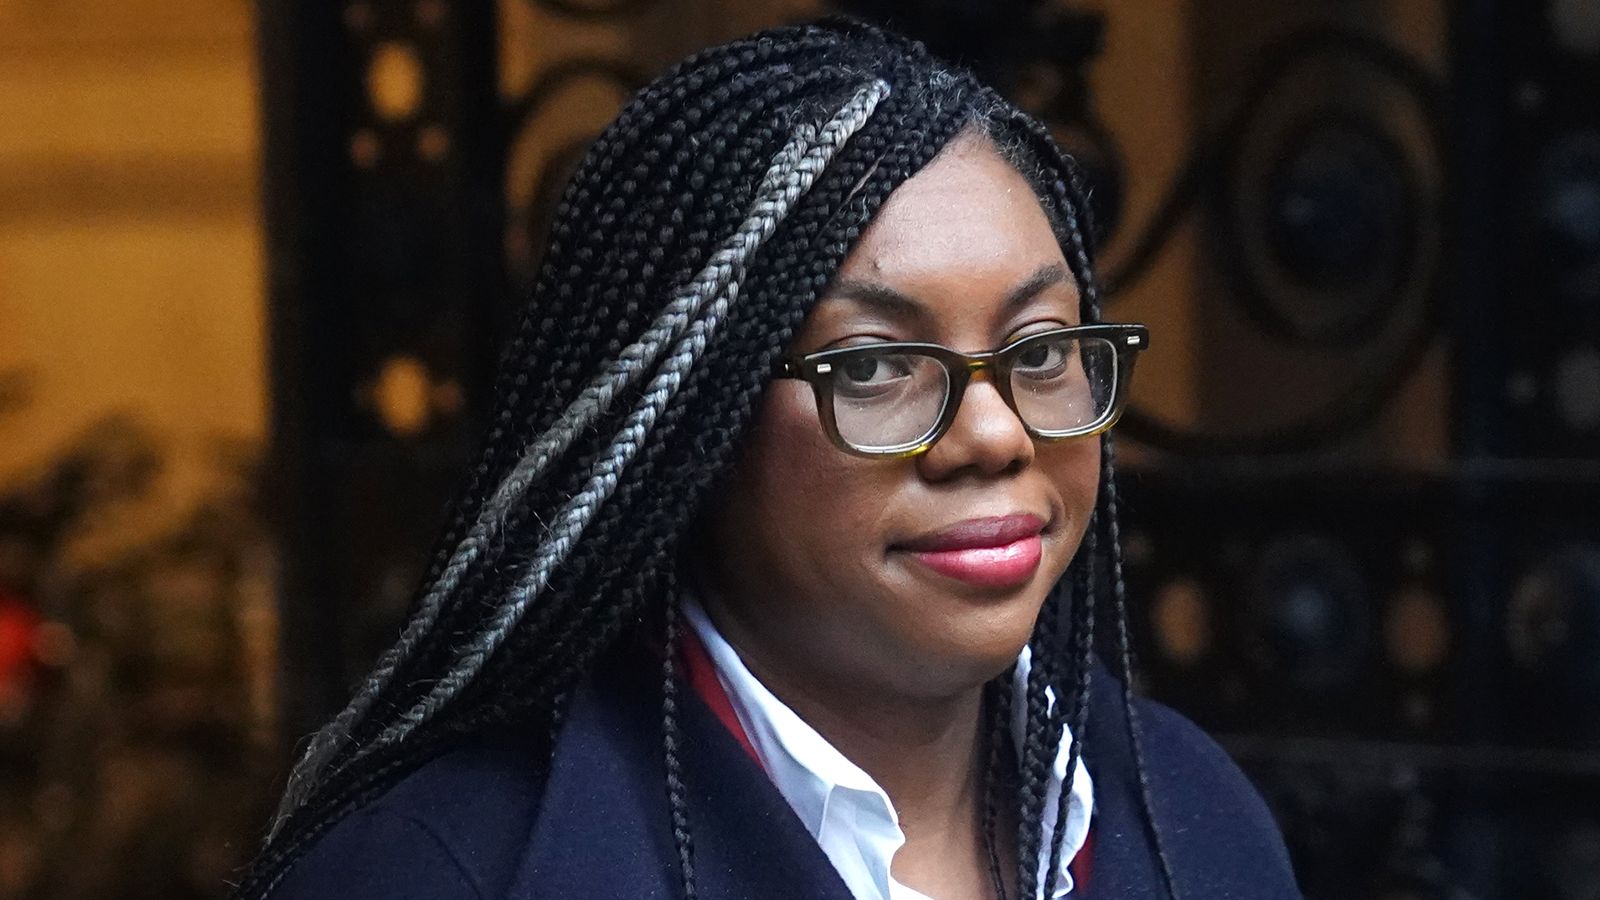 Kemi Badenoch confirms sacking of Post Office chair - but says issues 'go beyond' Horizon IT scandal